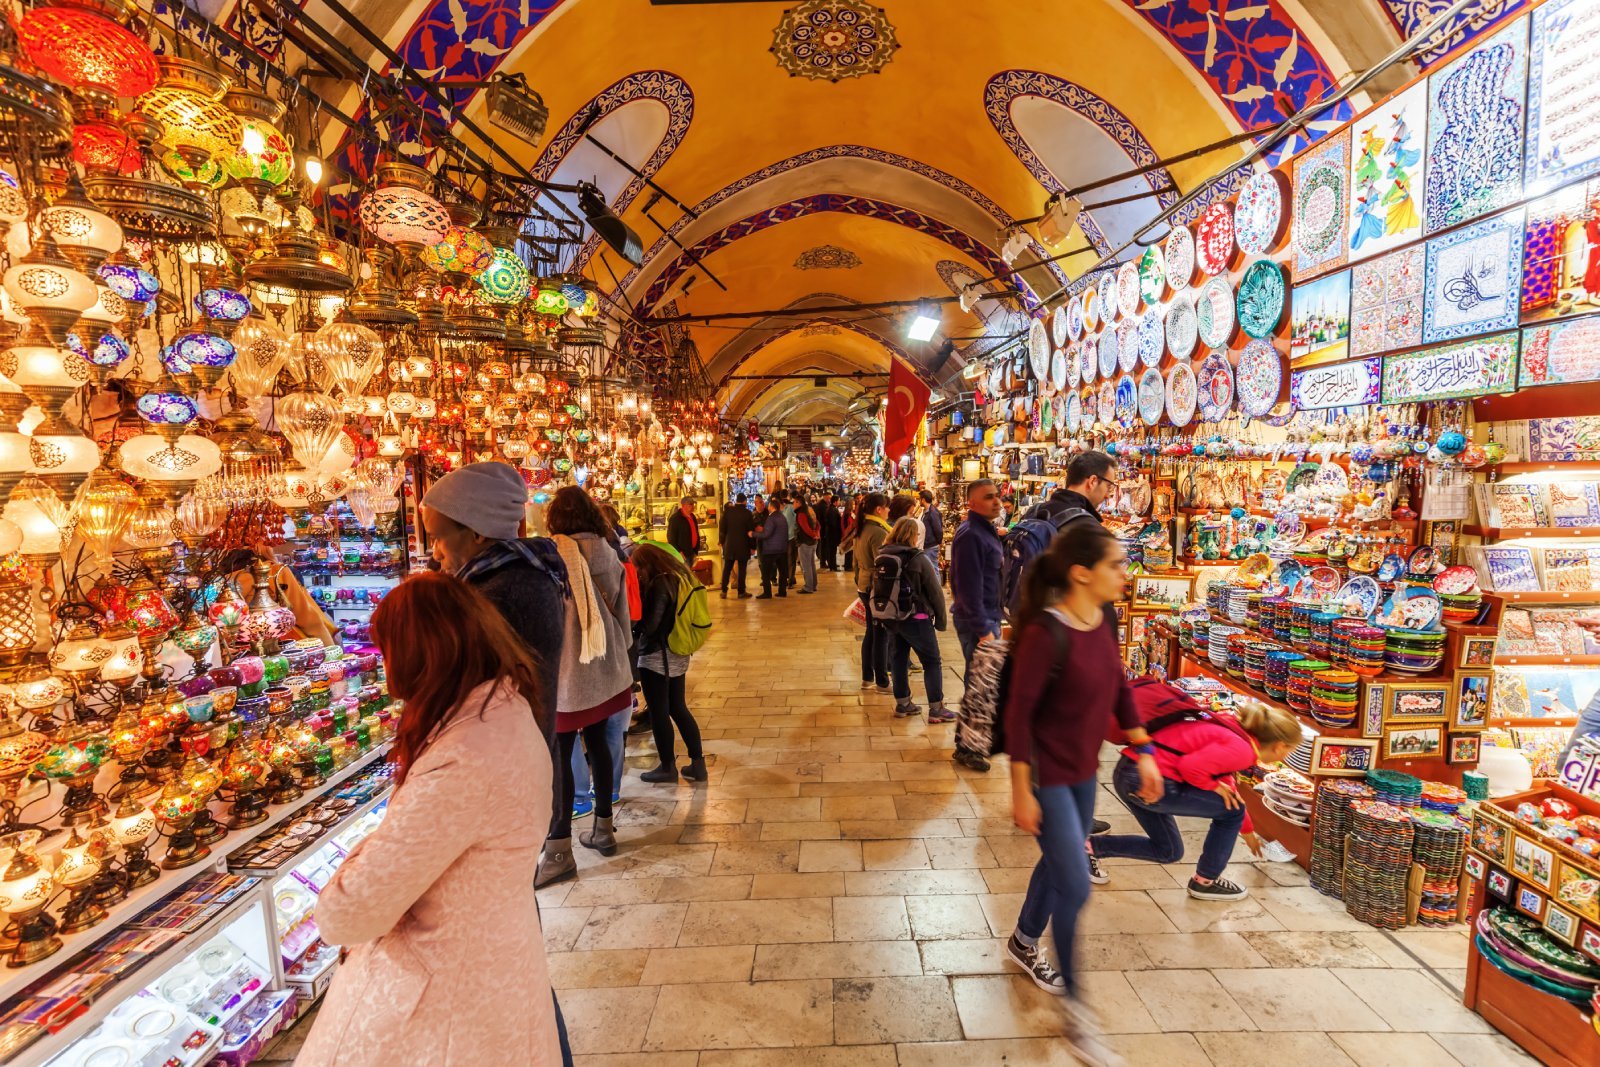 <p class="wp-caption-text">Image Credit: Shutterstock / Christian Mueller</p>  <p><span>The Grand Bazaar, one of the world’s largest and oldest covered markets, is a labyrinth of over 4,000 shops selling everything from spices and sweets to jewelry and ceramics. Walking through its crowded alleys, you’ll be enveloped in a sensory overload of colors, smells, and sounds. The bazaar is a cultural experience offering insights into Turkish craftsmanship and the art of negotiation.</span></p>